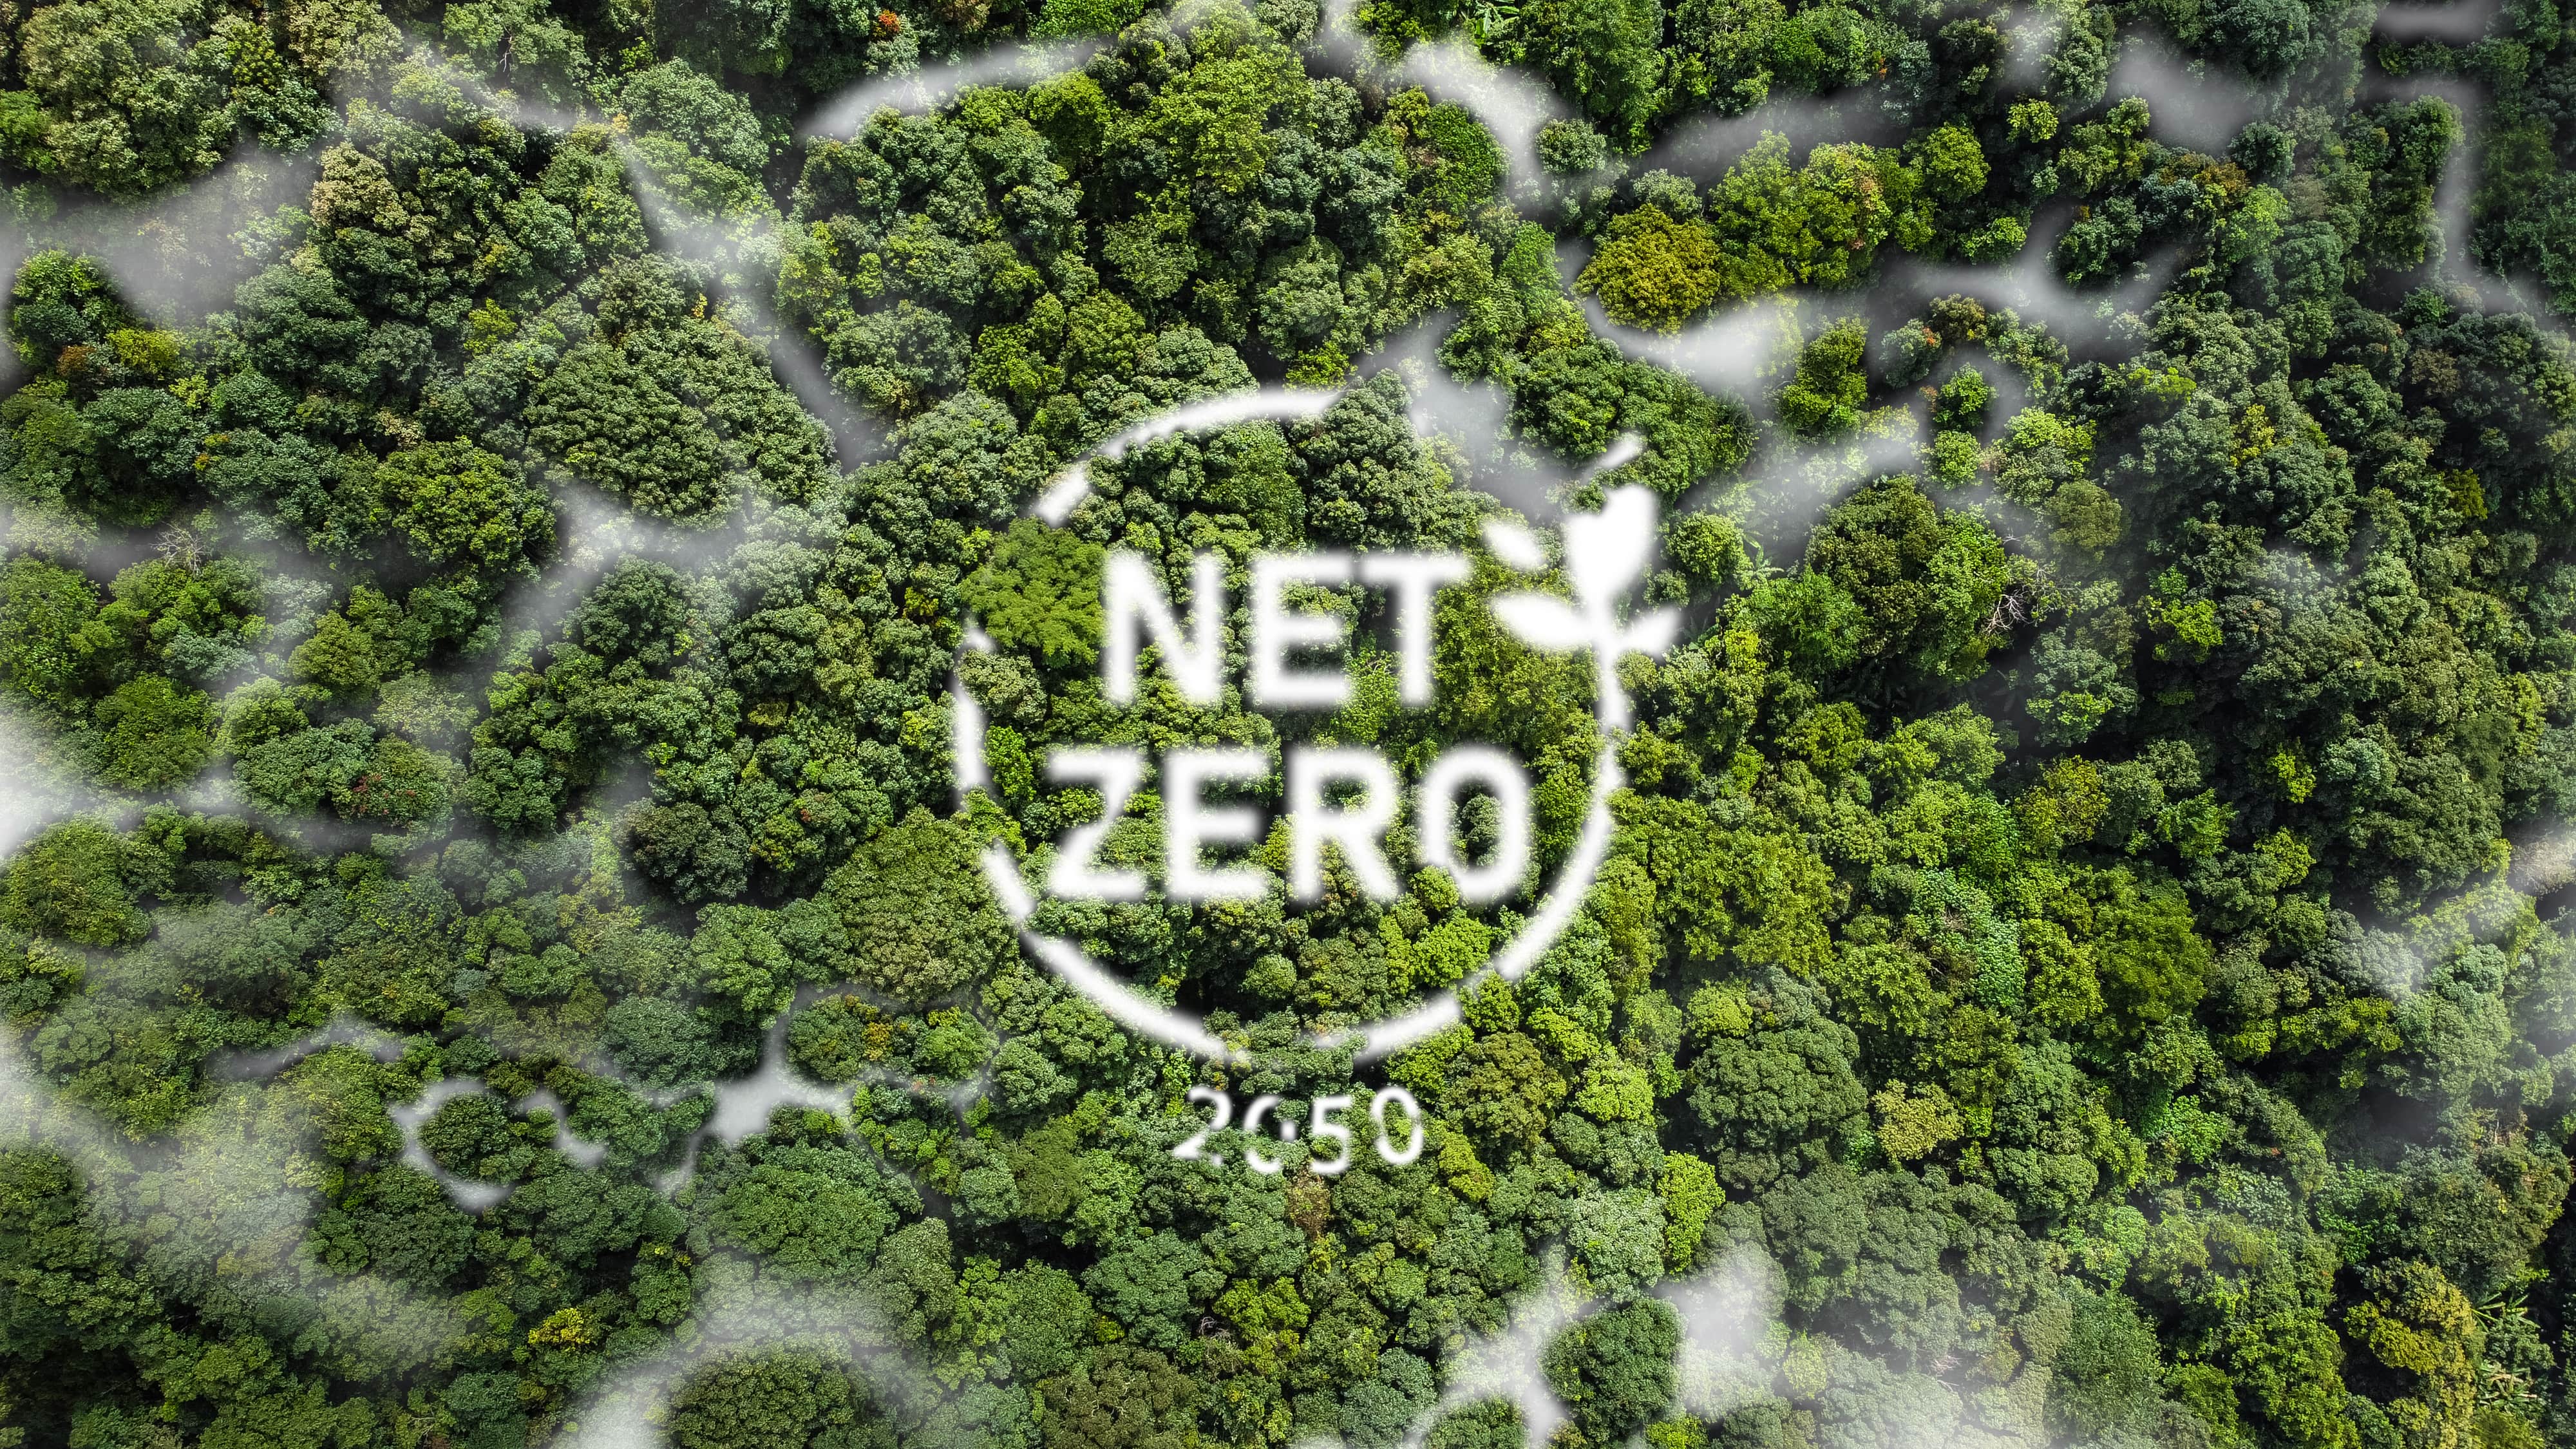 Birdseye view of a forest with Net Zero 2050 graphic overlayed